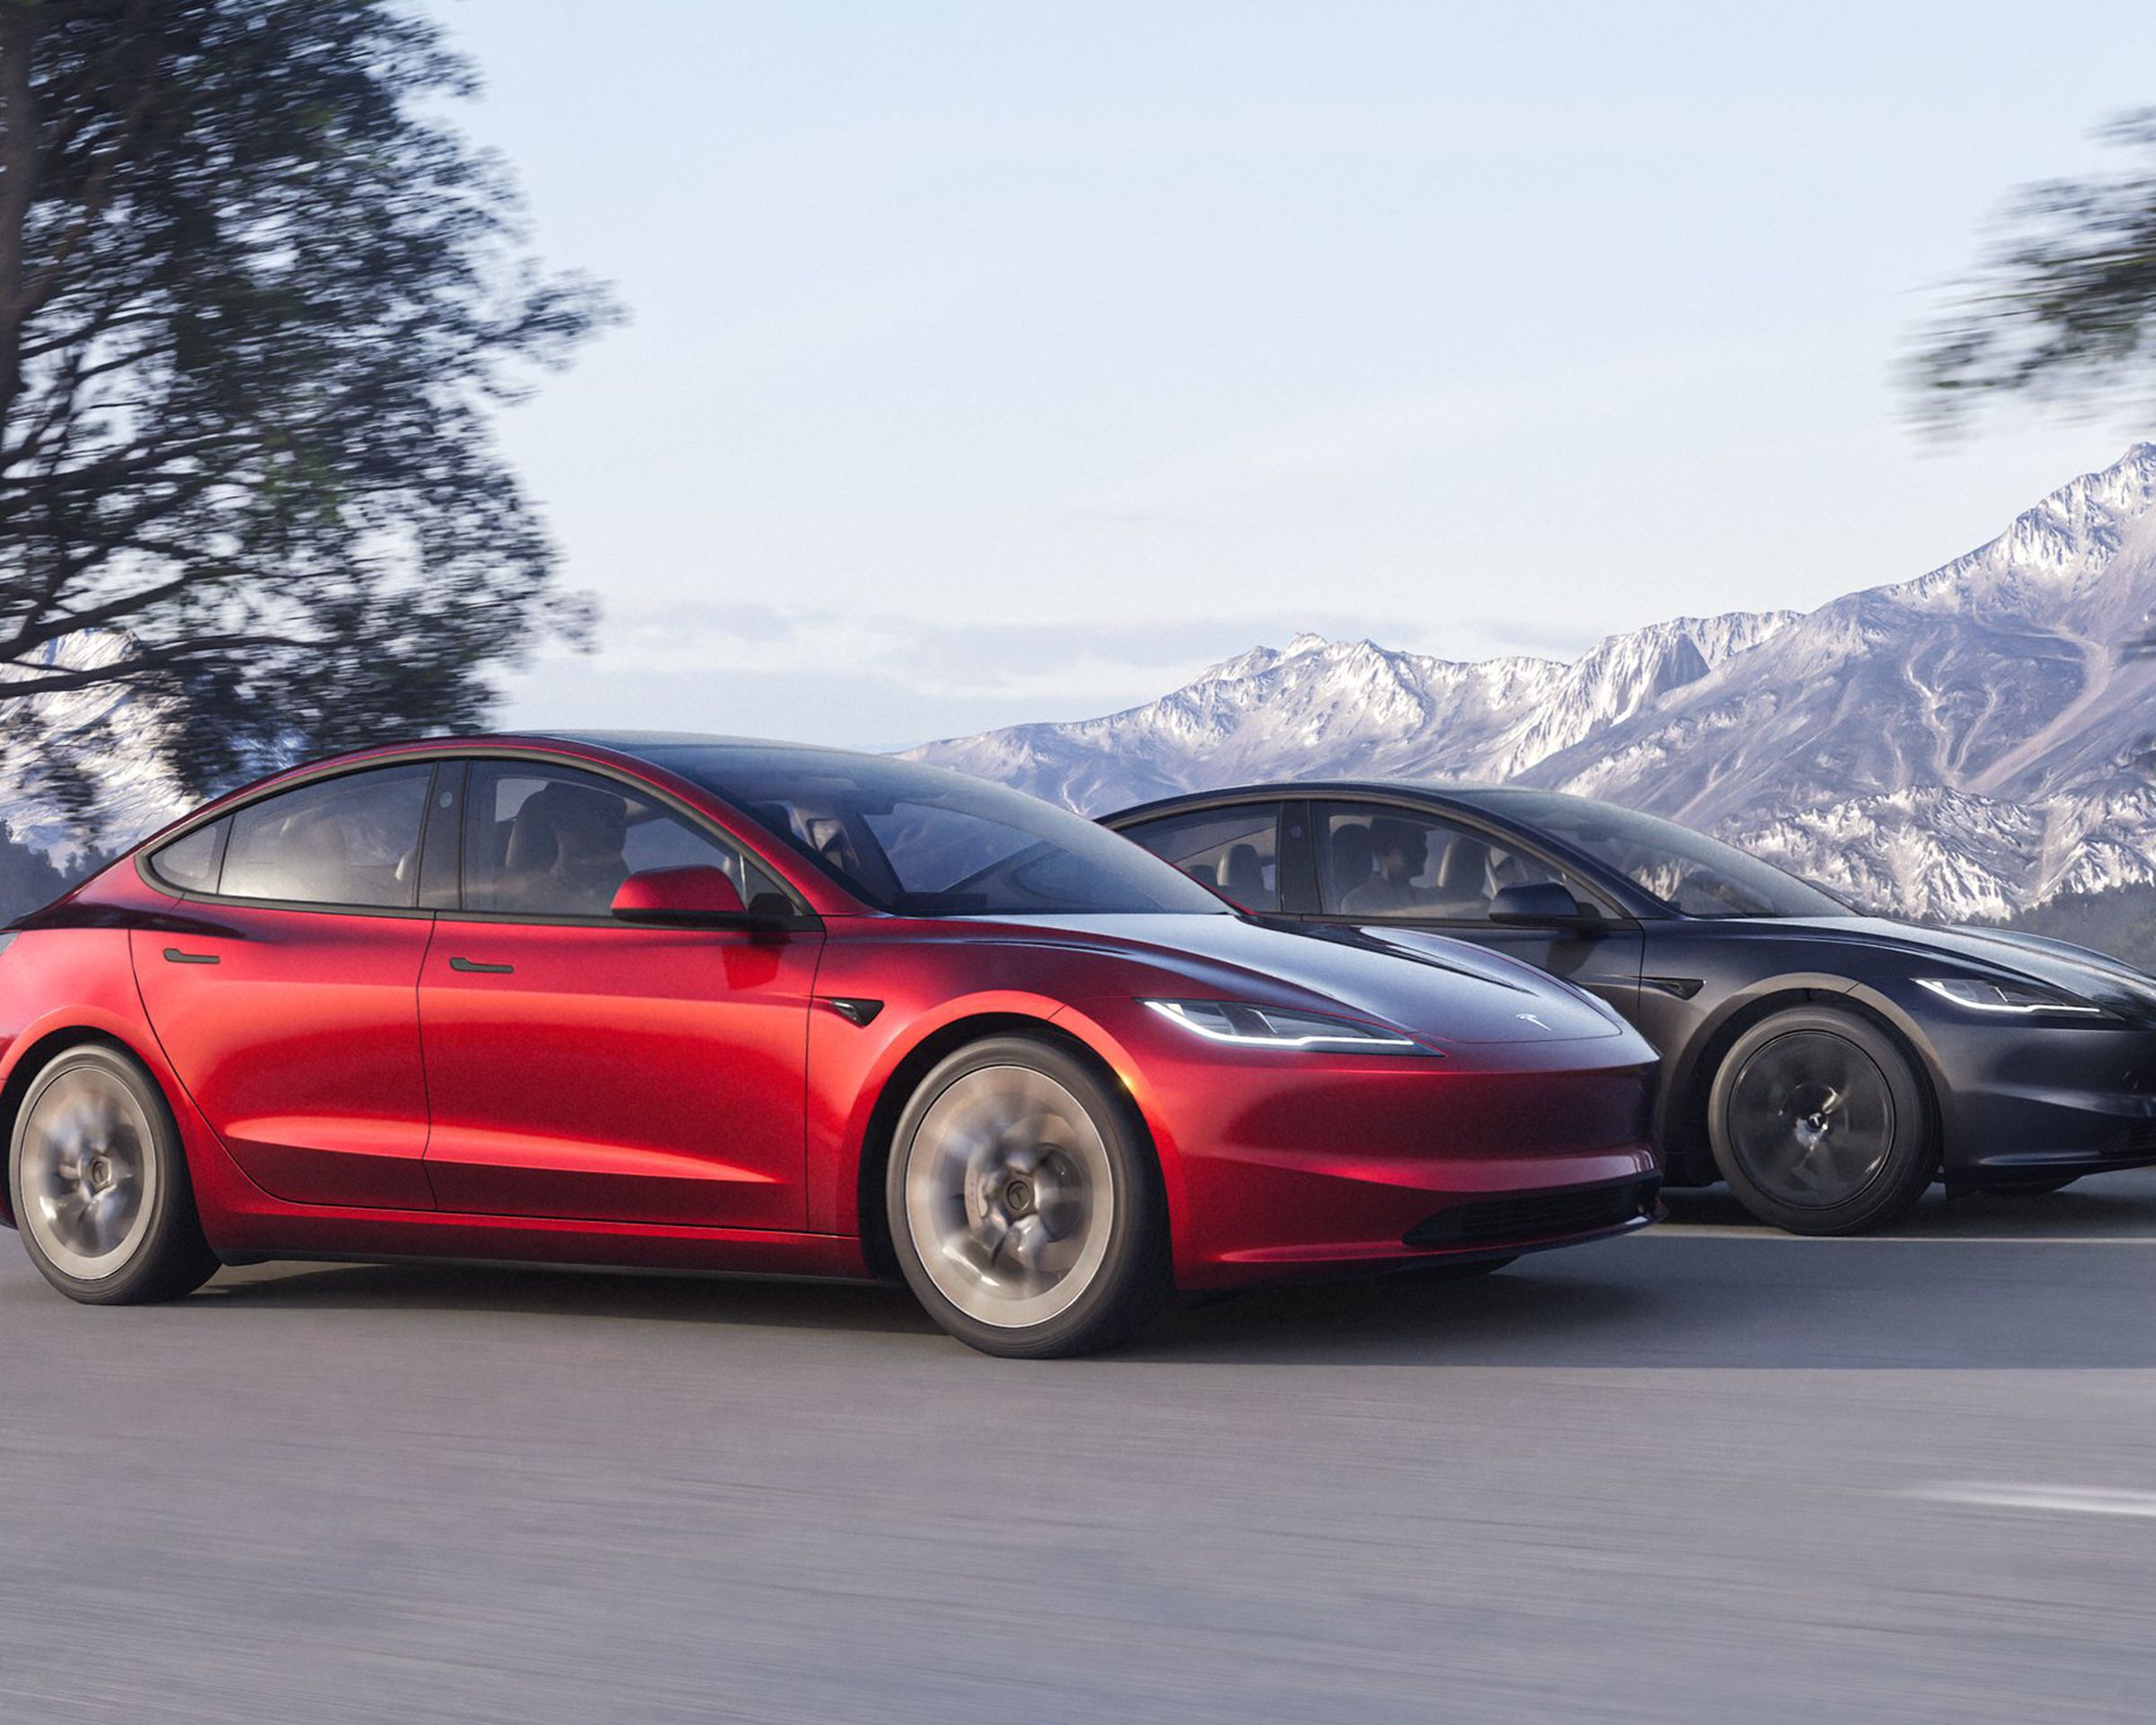 Two Tesla Model 3s shown driving on a mountain road, one red and one gray.